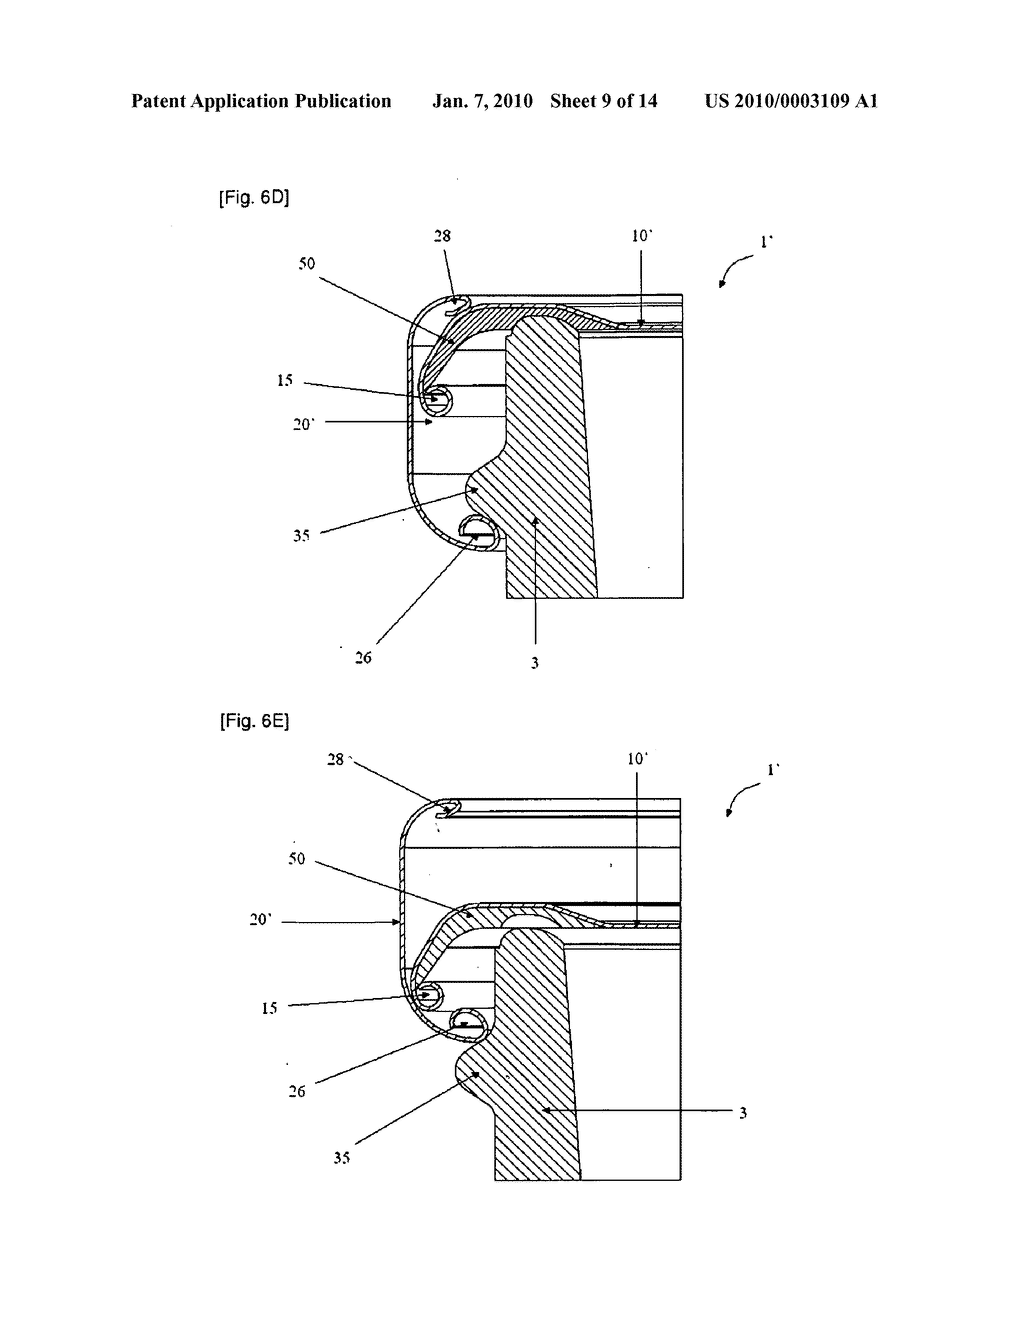 METHOD FOR PRODUCING SUCH A METAL CLOSURE WITH SEPERATE DISC AND RING FROM A SINGLE CLOSURE BLANK - diagram, schematic, and image 10